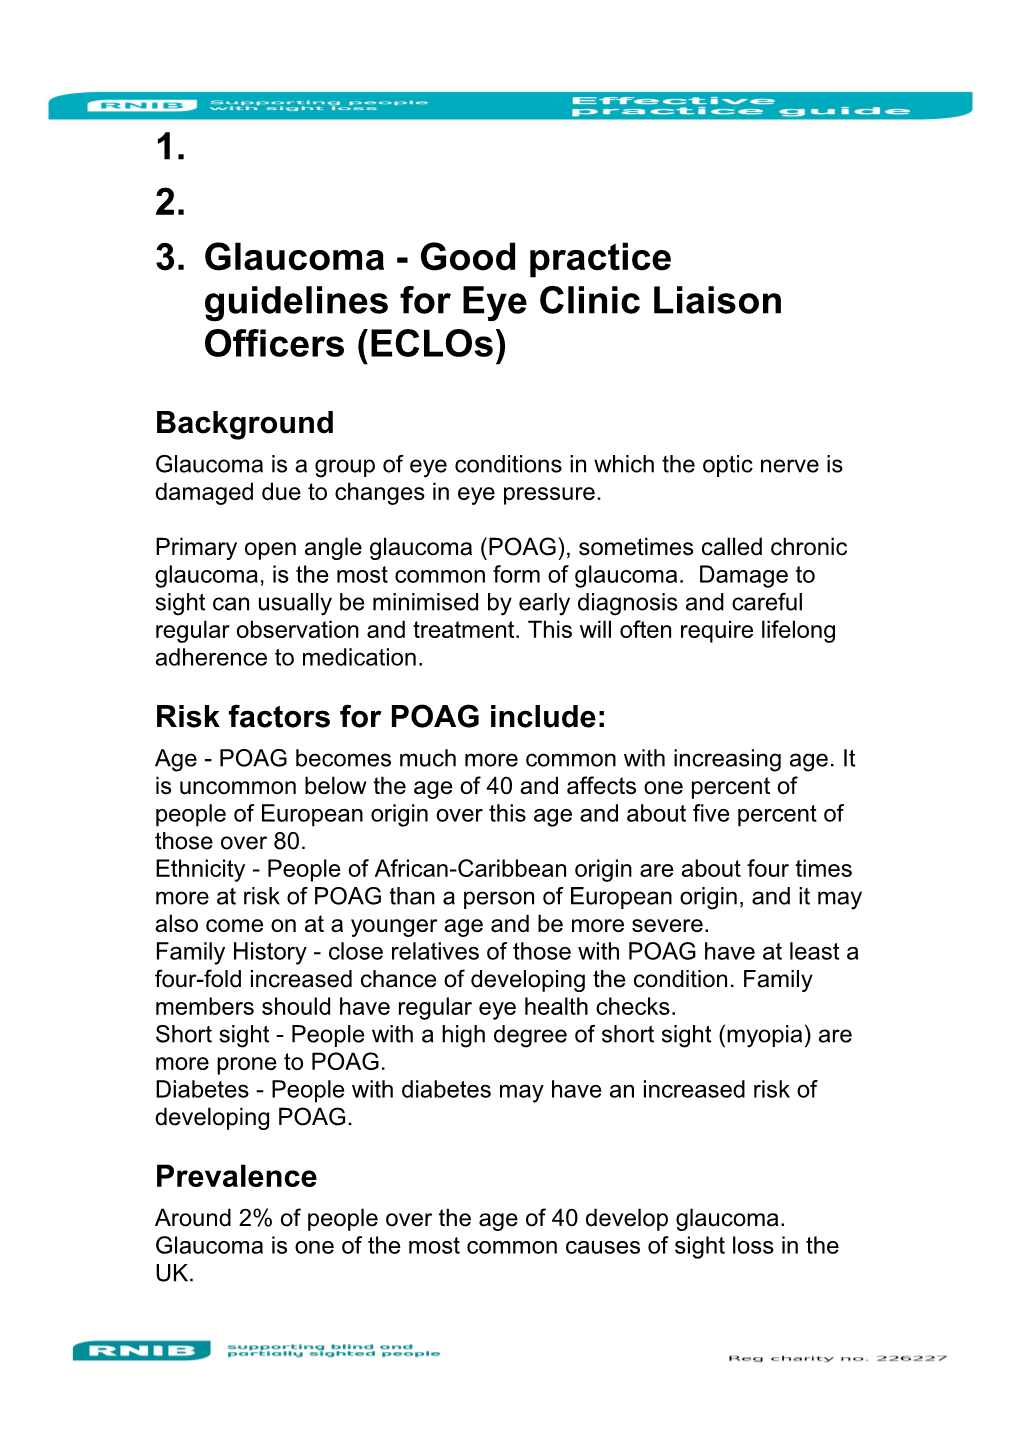 Glaucoma - Good Practice Guidelines for Eye Clinic Liaison Officers (Eclos)